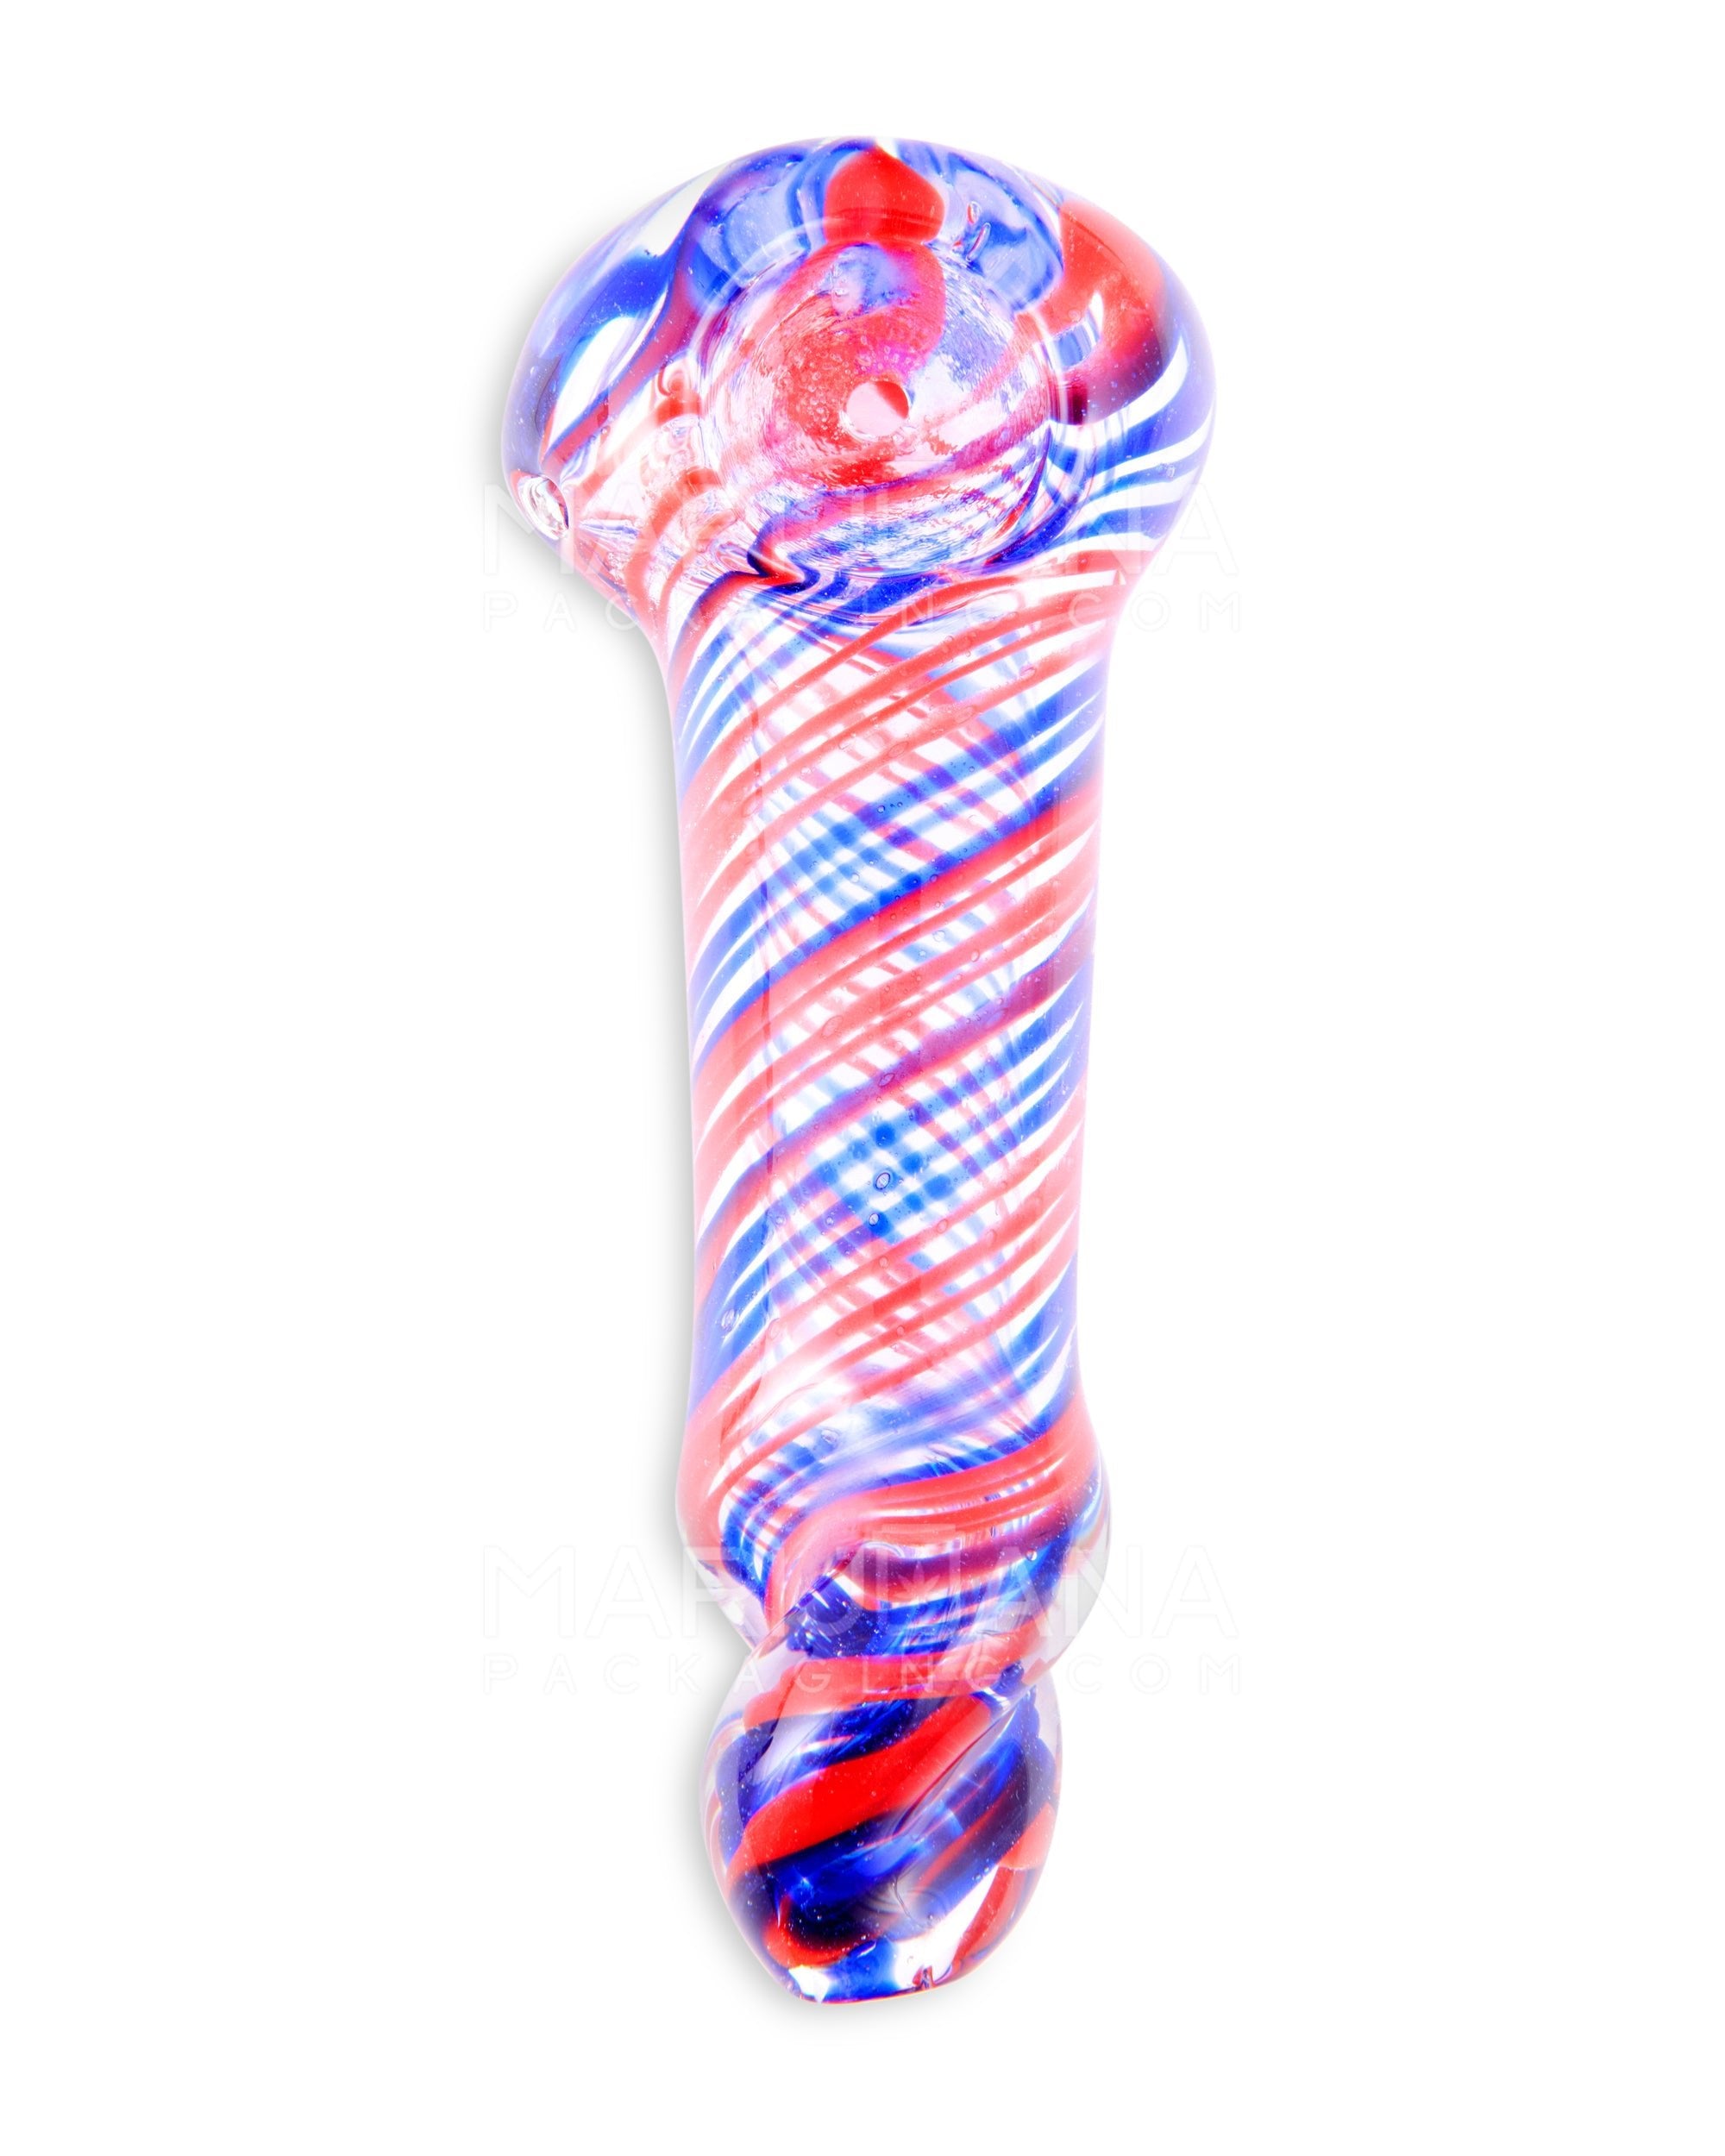 Variety Mouthpiece Spiral Spoon Hand Pipe w/ Ribboning | 4.5in Long - Glass - Assorted - 2